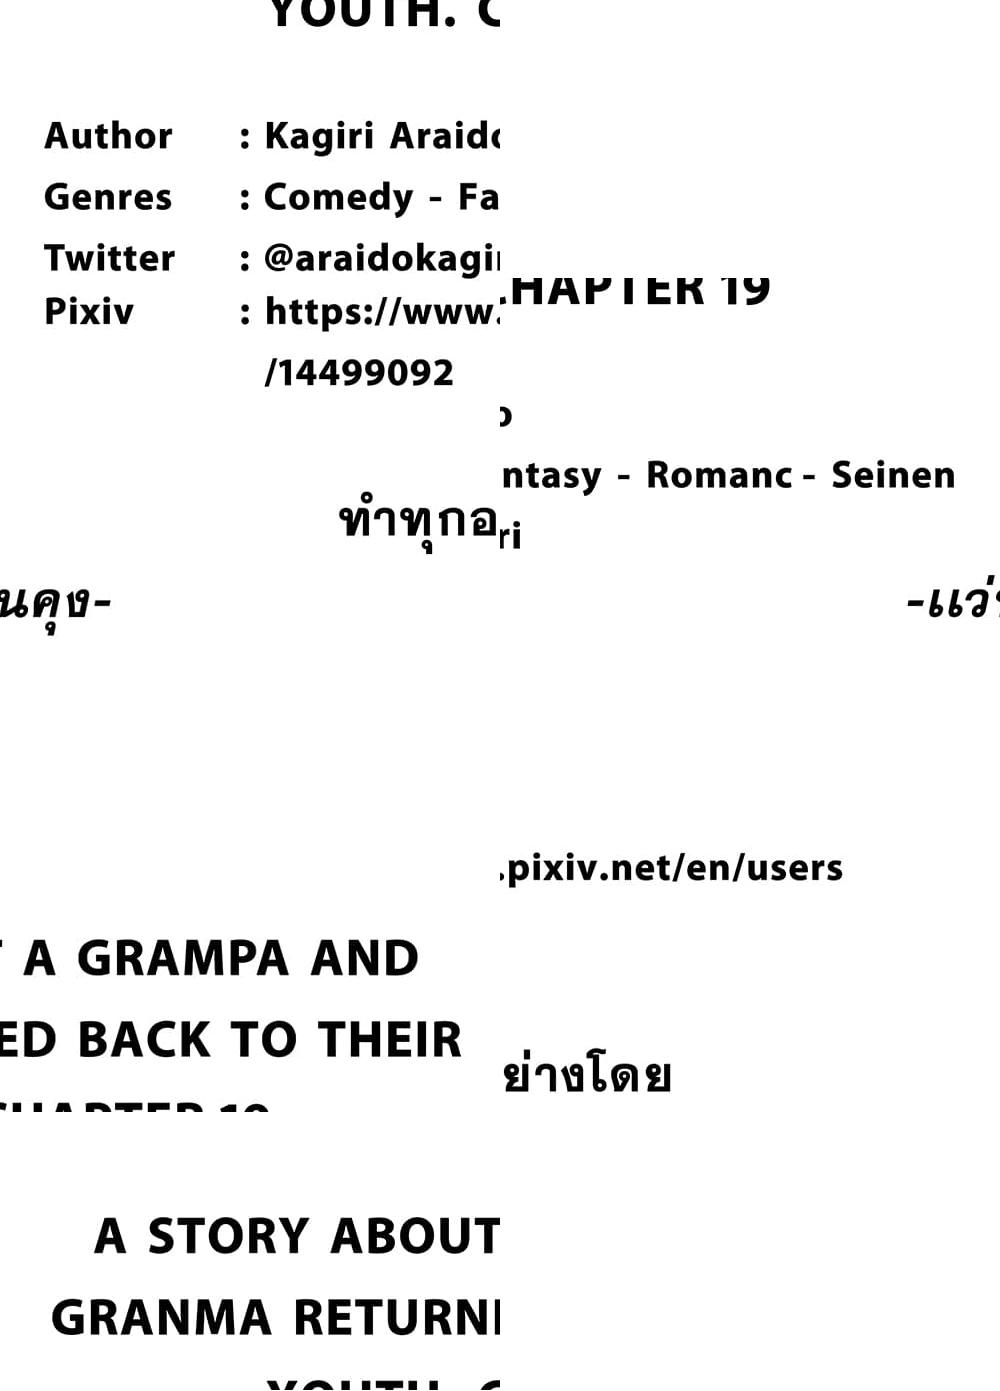 A Story About A Grampa and Granma Returned Back to their Youth คู่รักวัยดึกหวนคืนวัยหวาน - 19 - 1